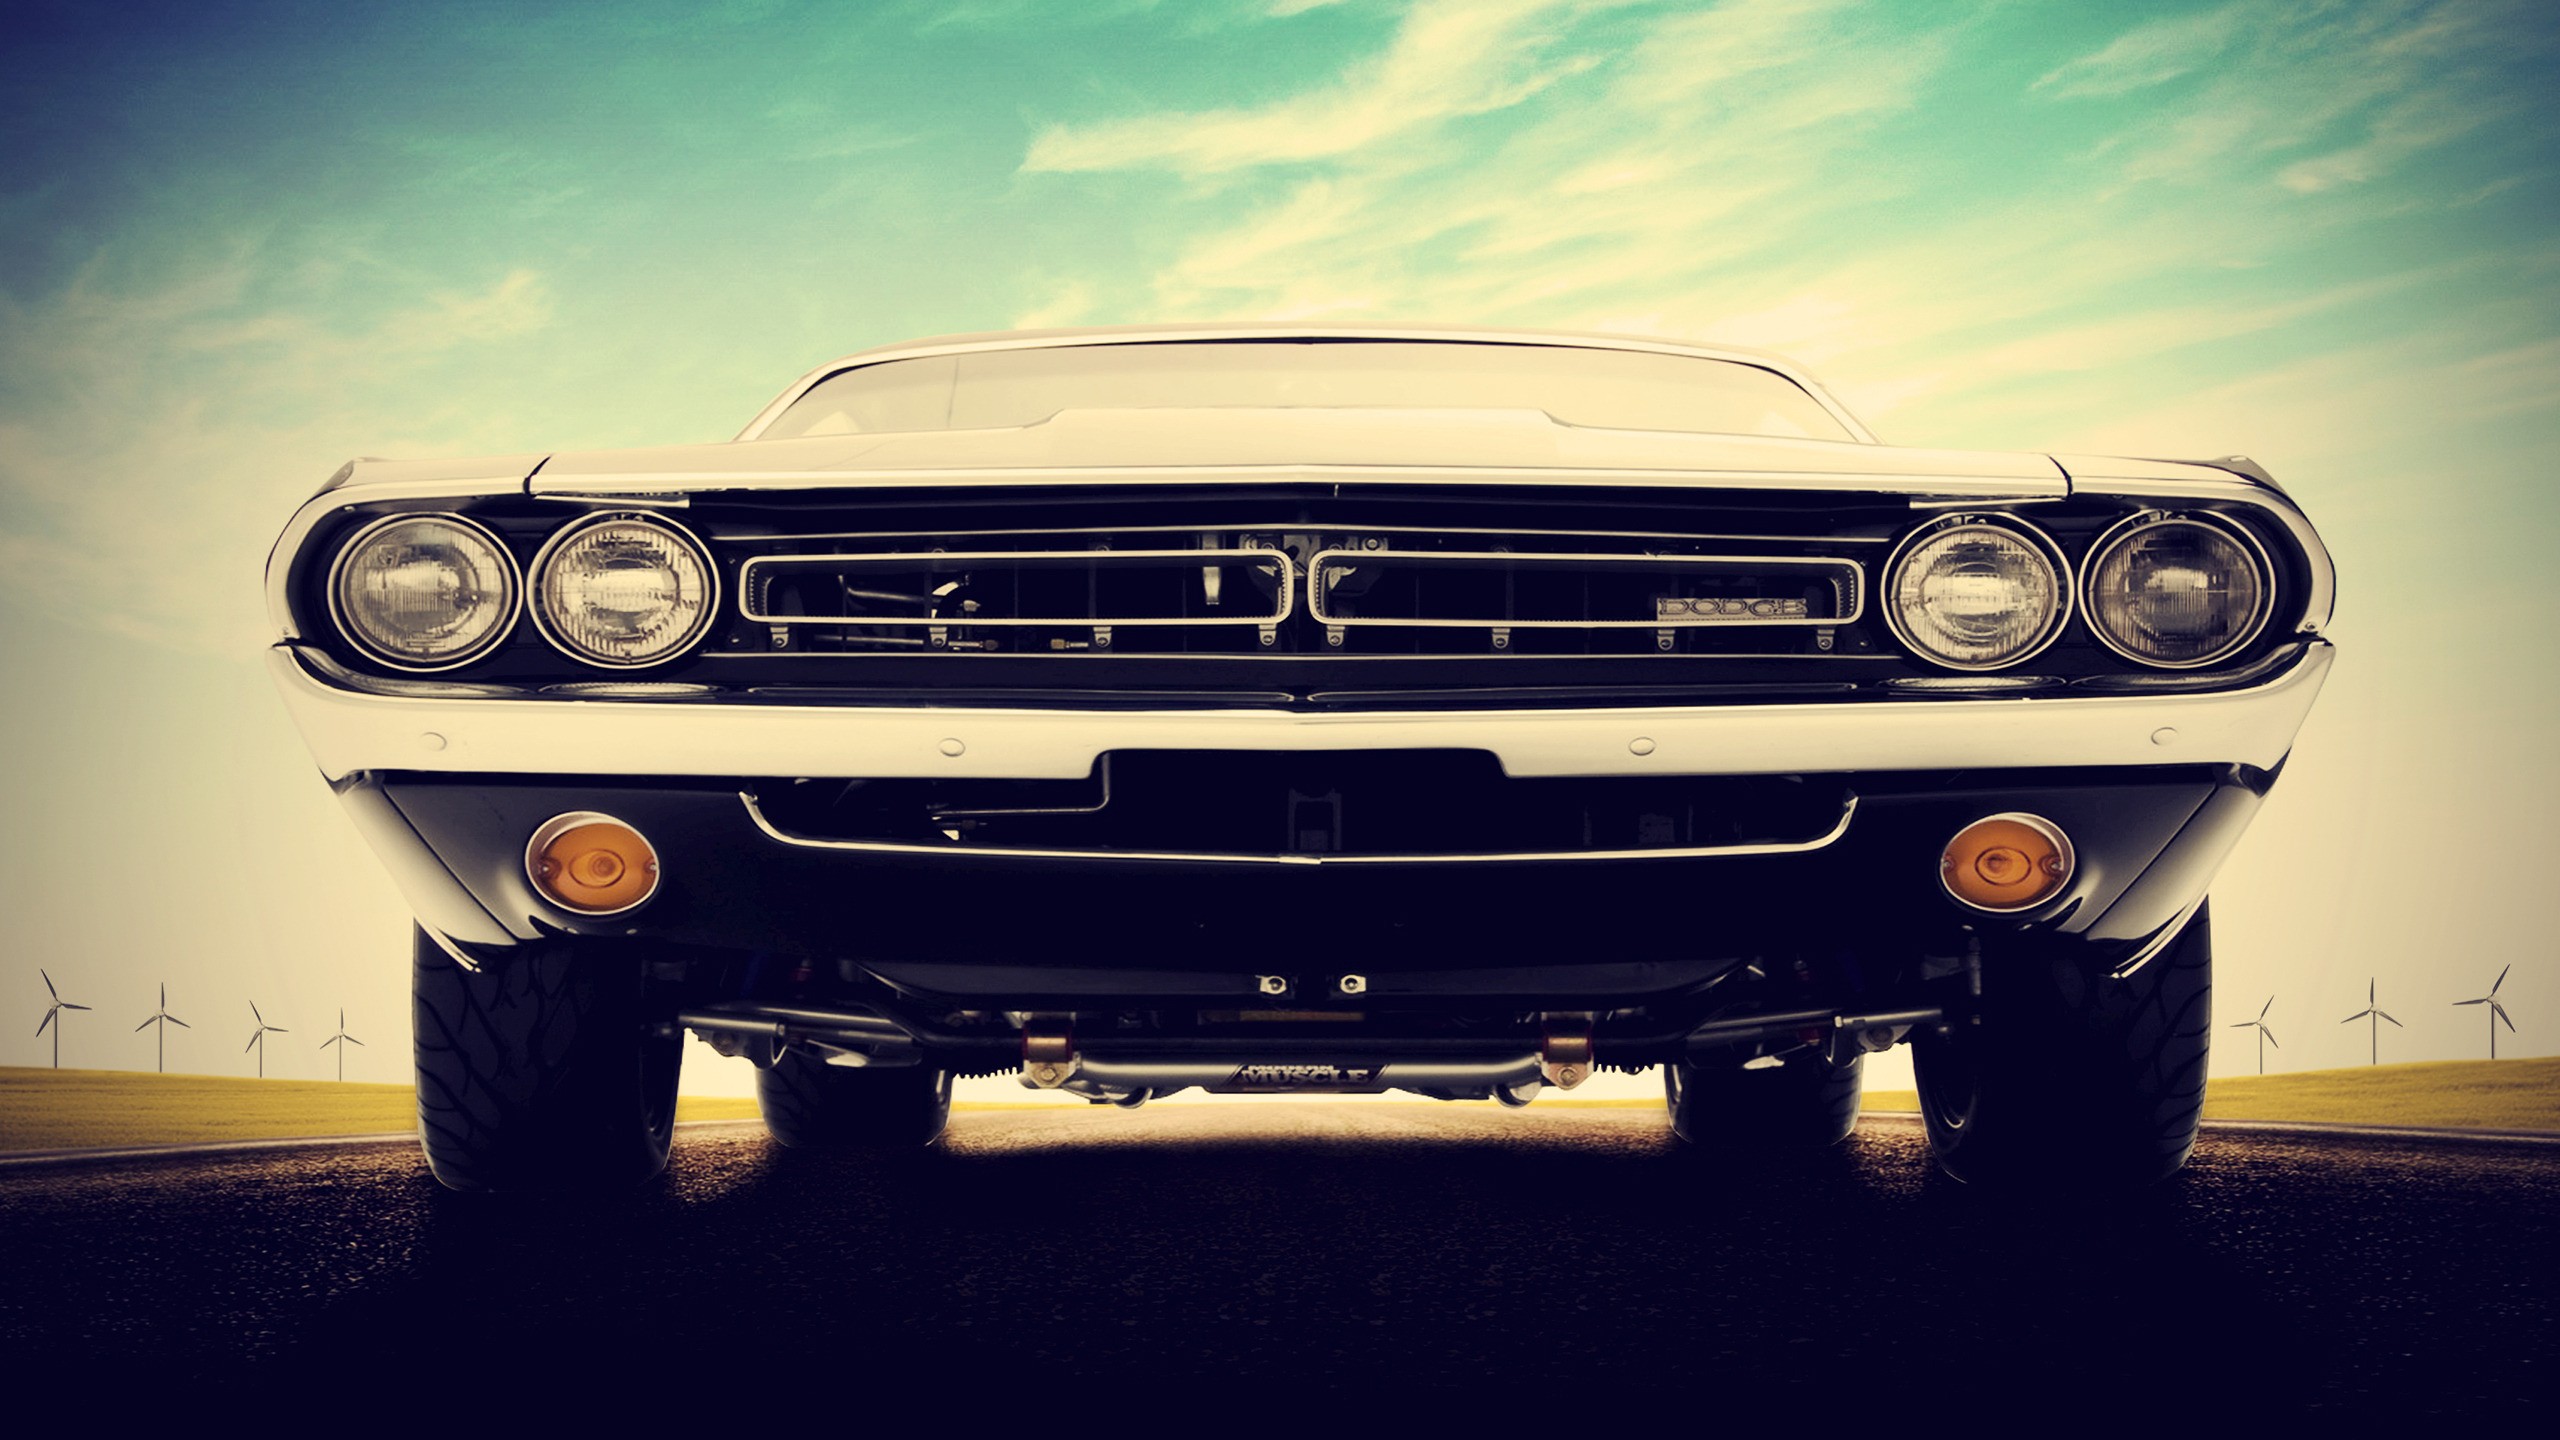 General 2560x1440 car Dodge Dodge Challenger muscle cars frontal view low-angle vehicle American cars